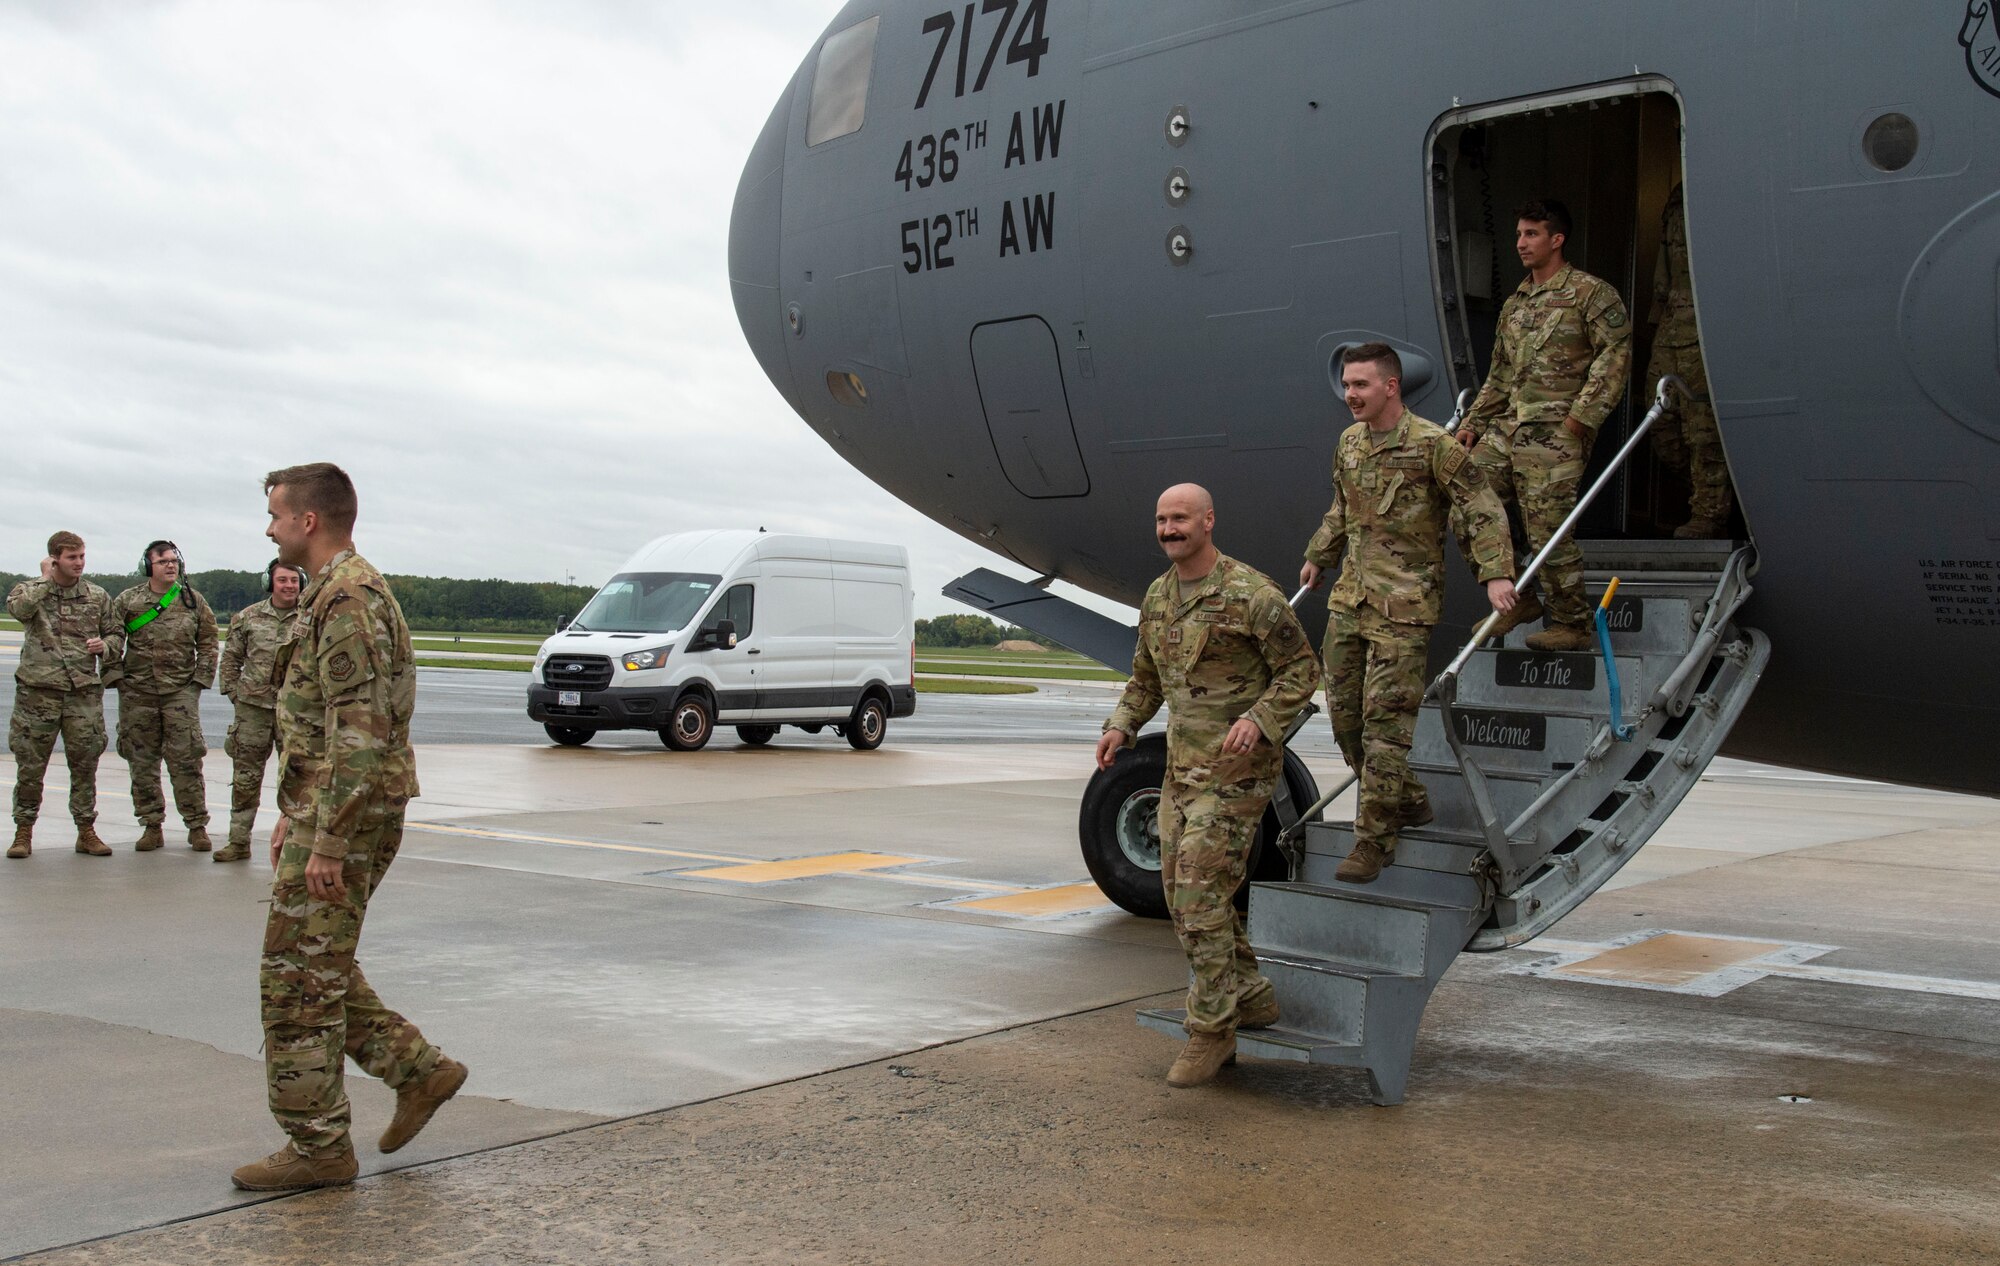 Deployed personnel deplane a C-17 Globemaster III at Dover Air Force Base, Delaware, Oct. 3, 2022. Team Dover members returned to Dover after being deployed to Al Udeid Air Base, Qatar. (U.S. Air Force photo by Roland Balik)